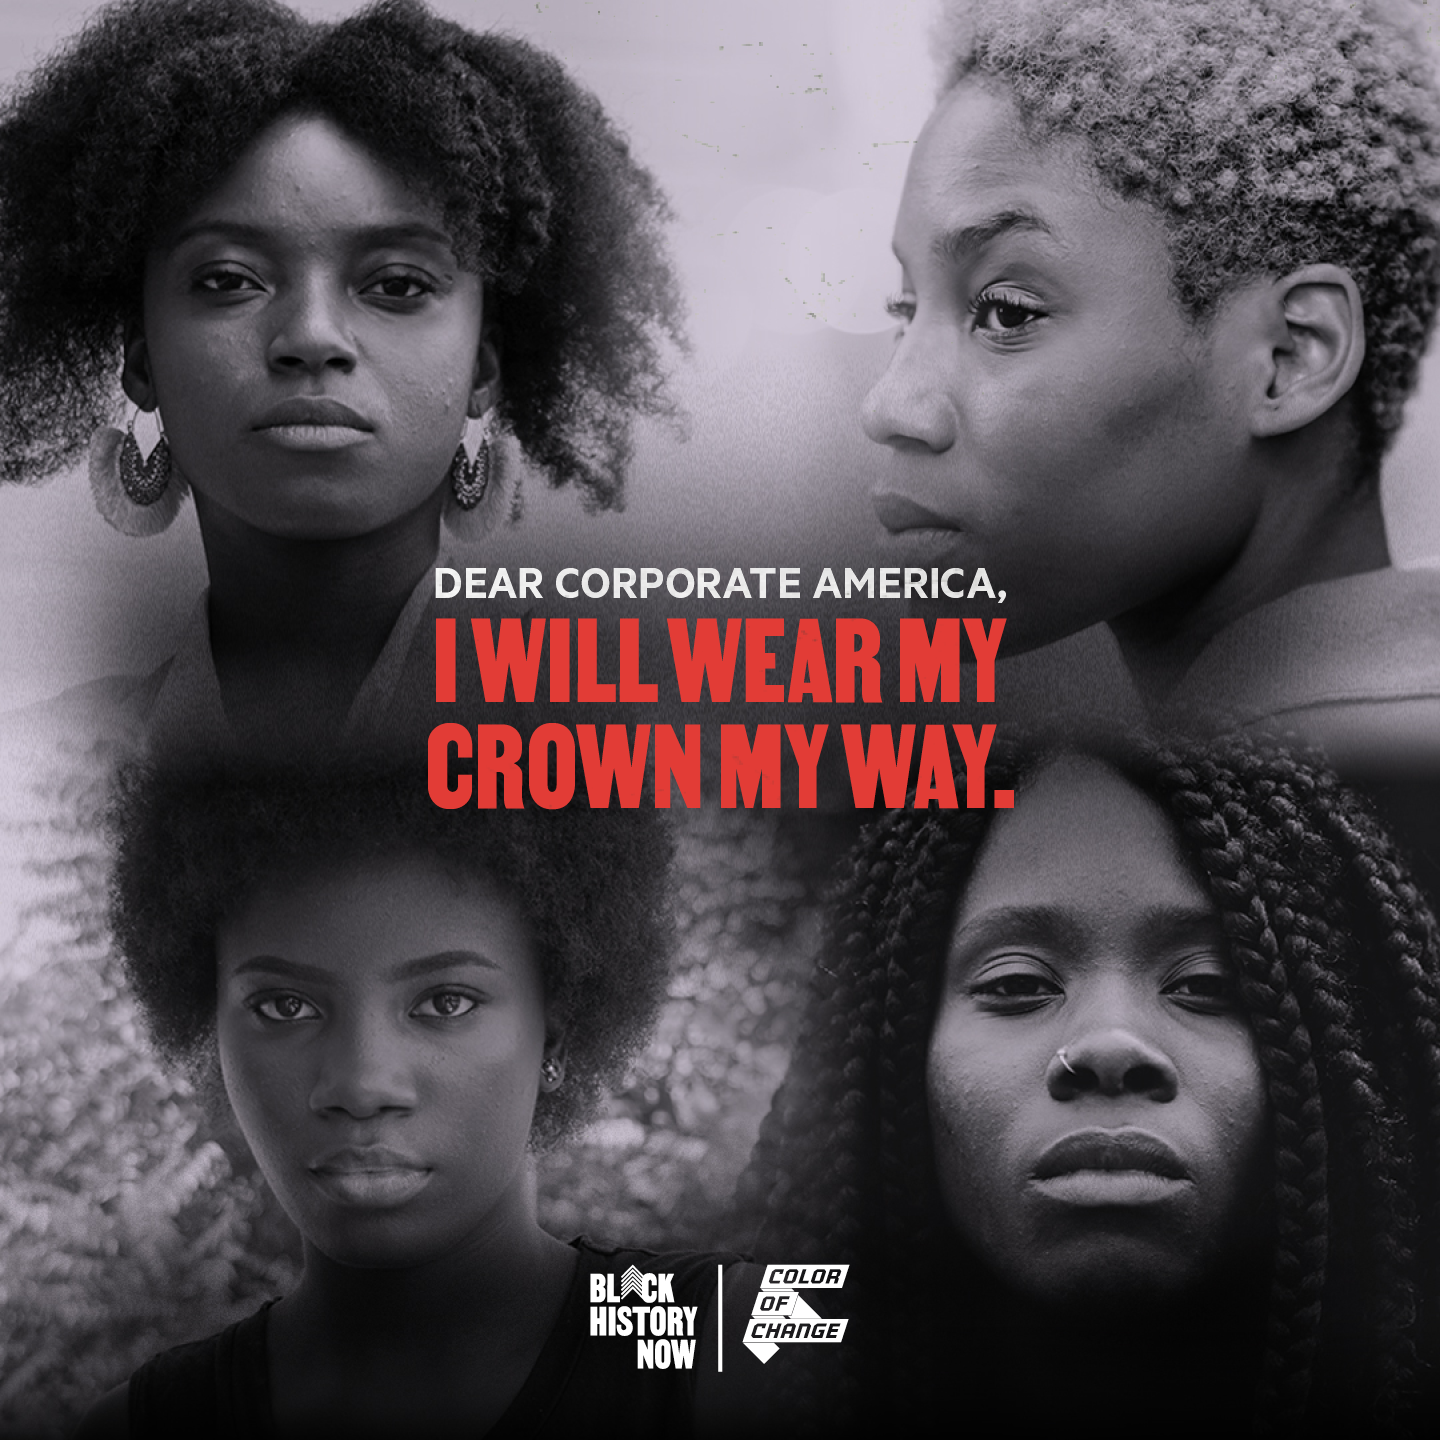 A photo of four Black women with different hairstyles. The text reads: Dear Corporate America, I will wear my crown my way.